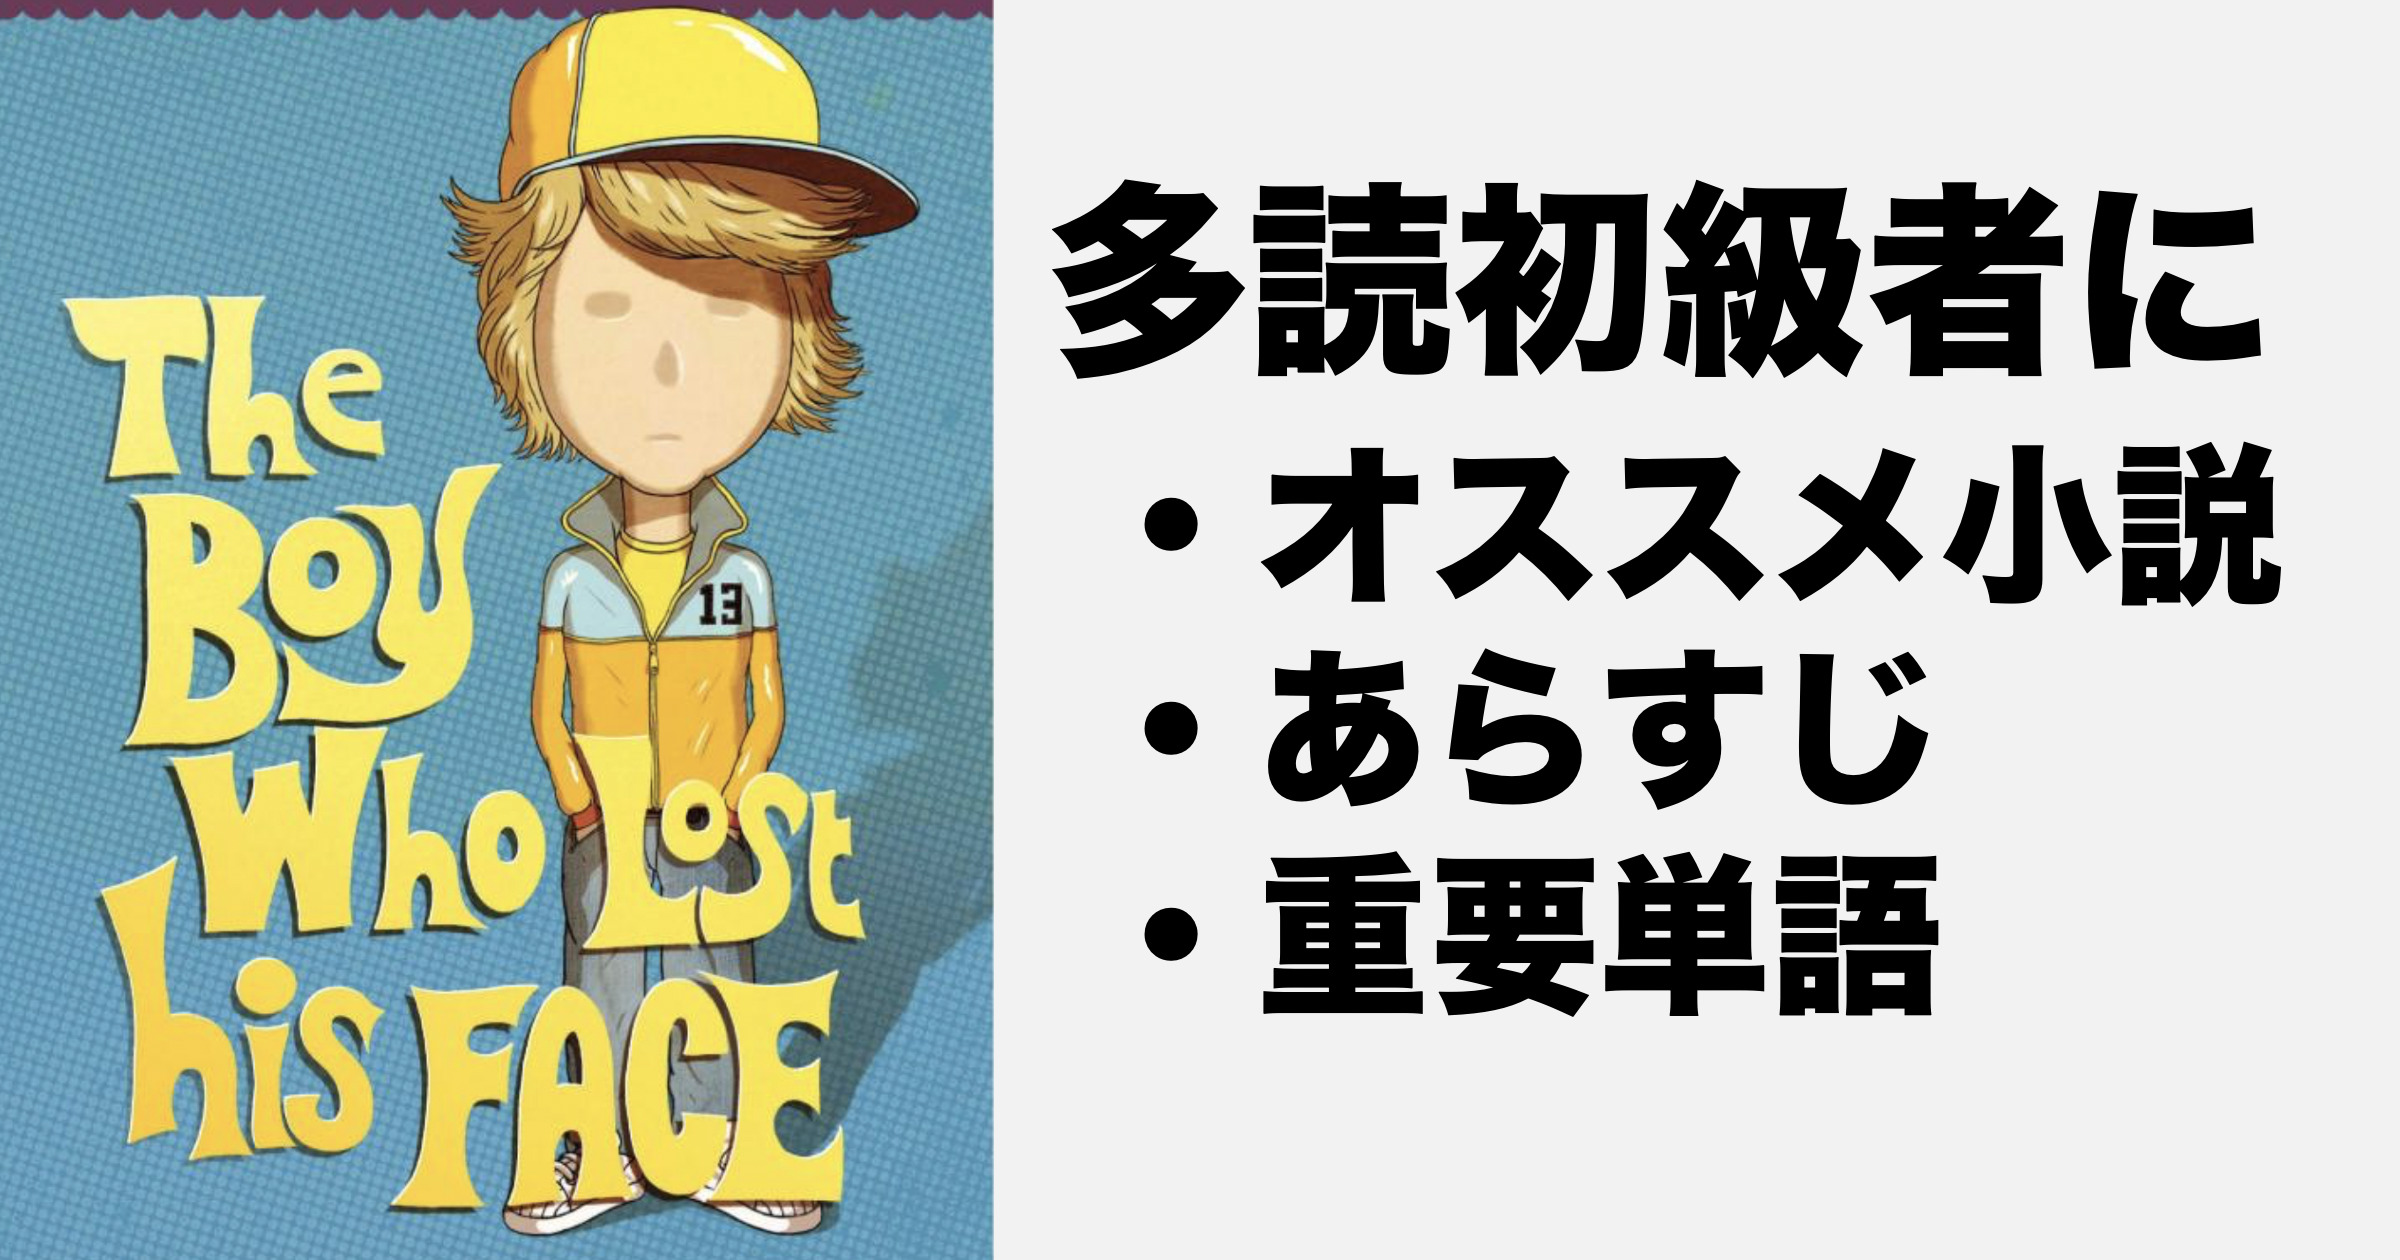 「The Boy Who Lost His Face」のあらすじと重要単語